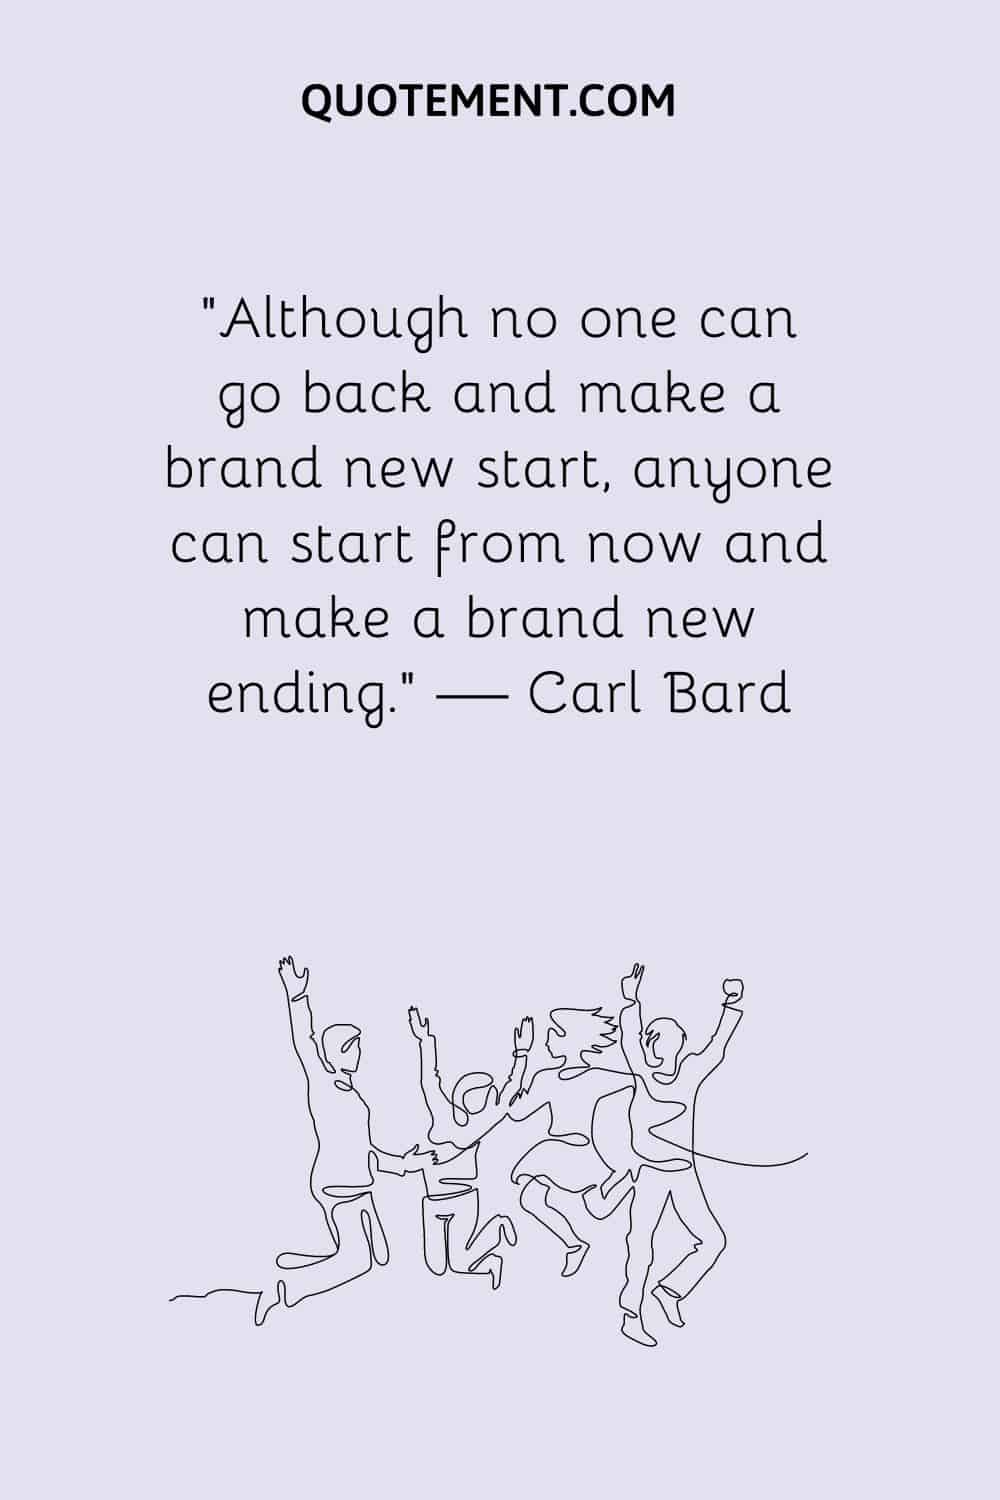 Although no one can go back and make a brand new start, anyone can start from now and make a brand new ending